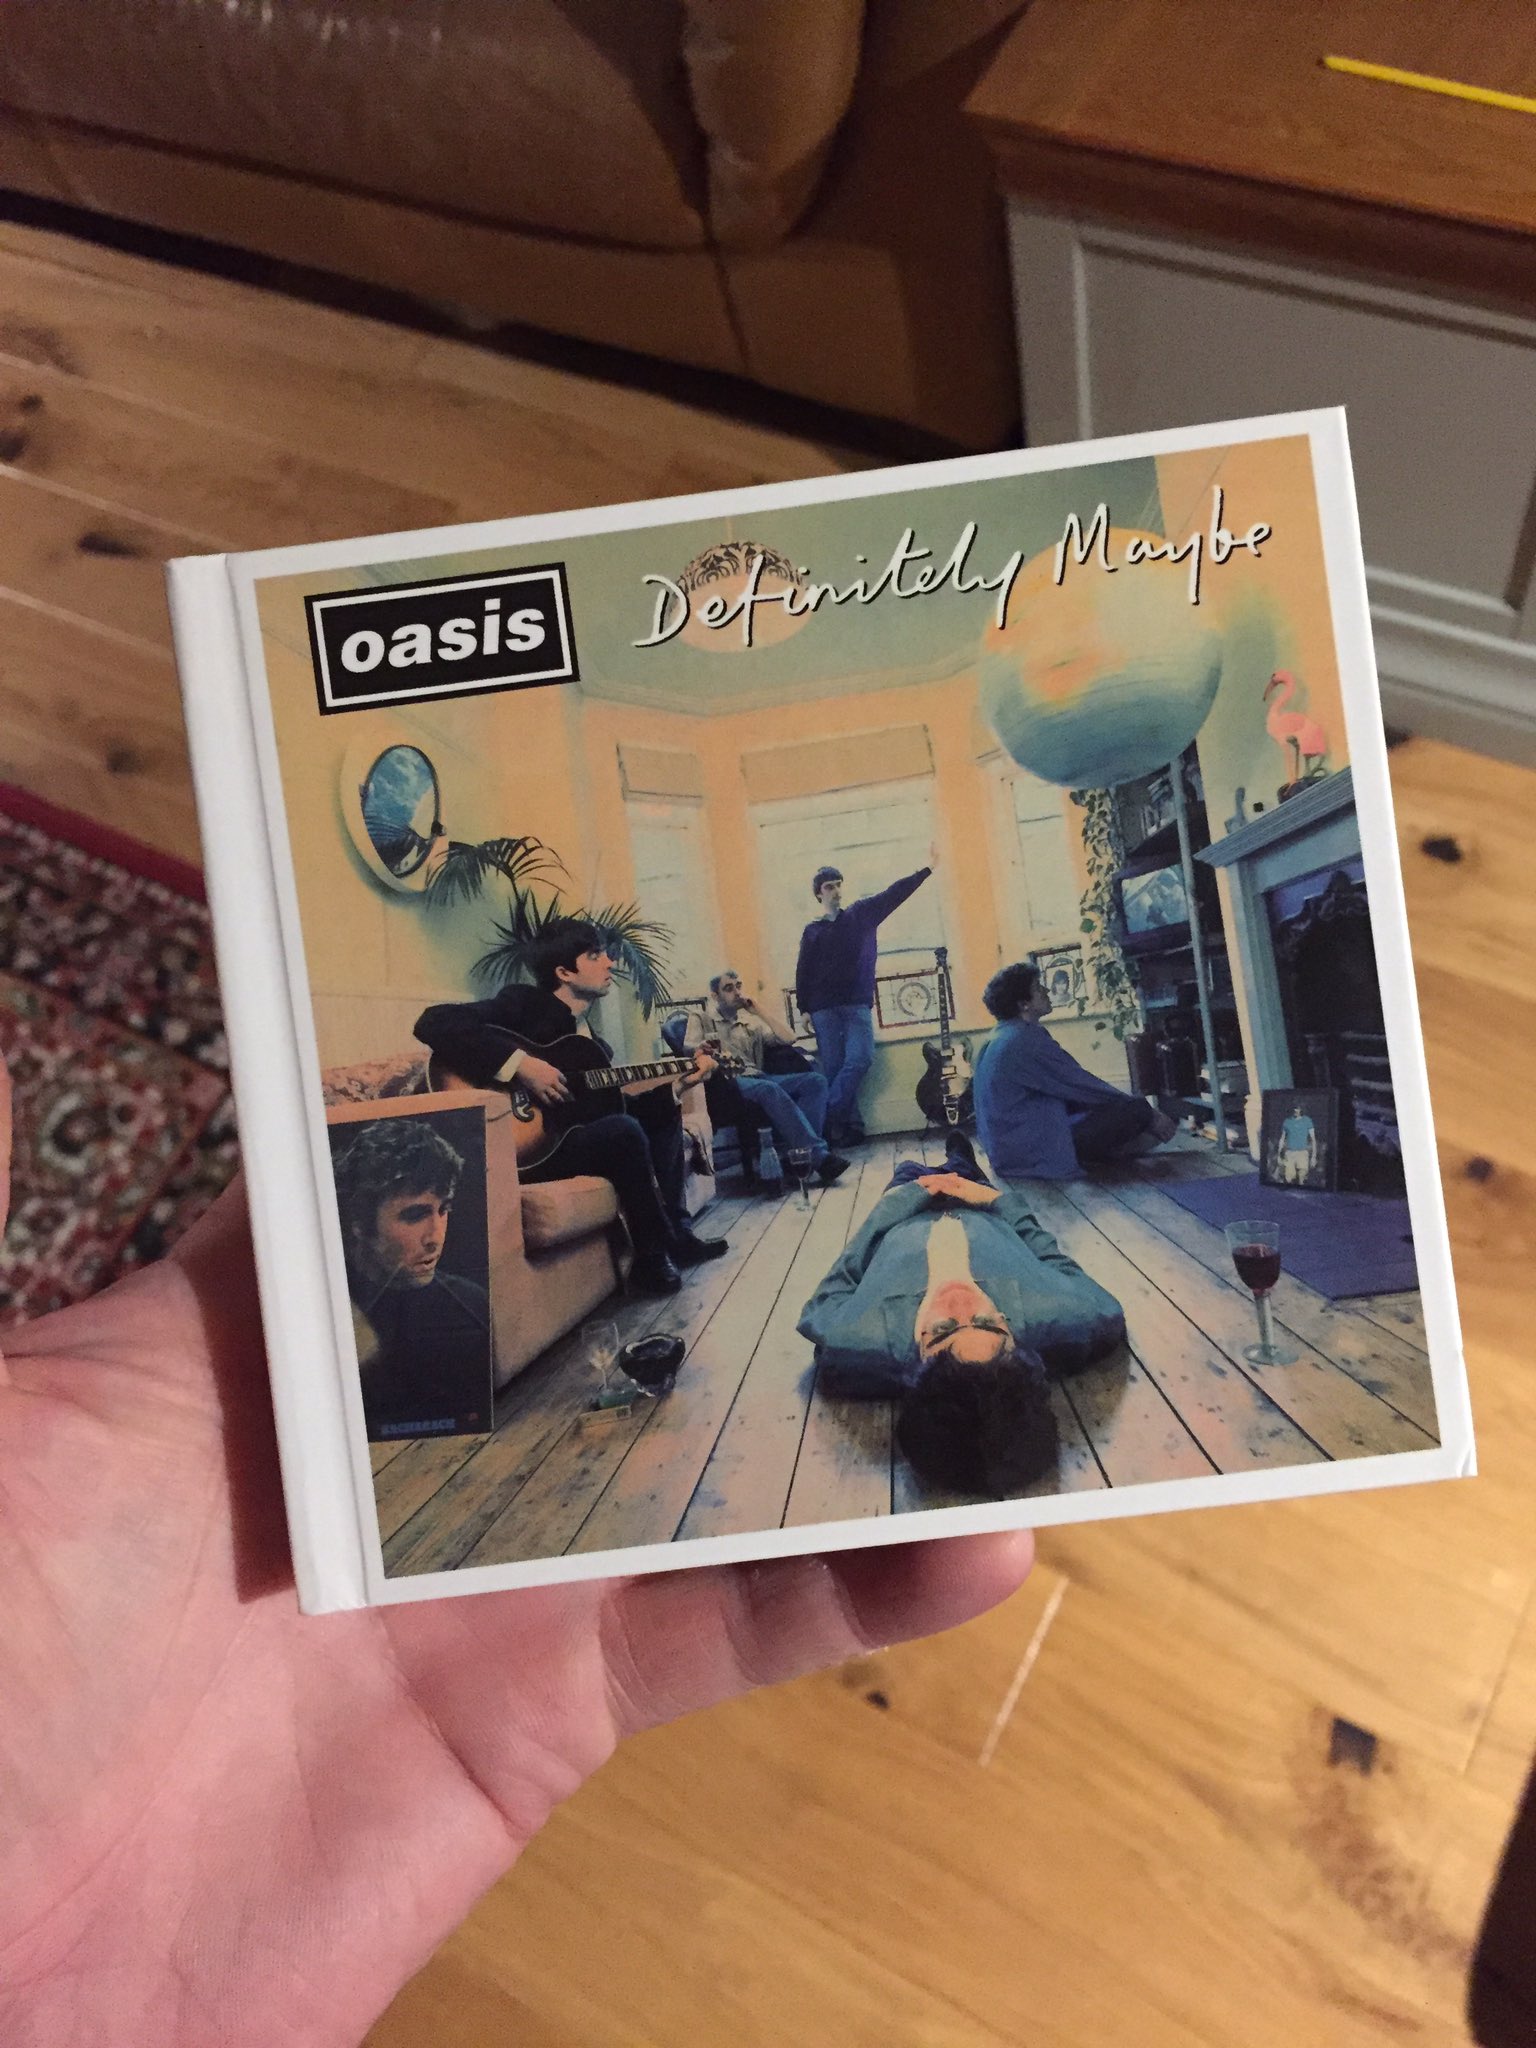 Oasis celebrate 25th anniversary of Definitely Maybe with limited edition  vinyl reissue